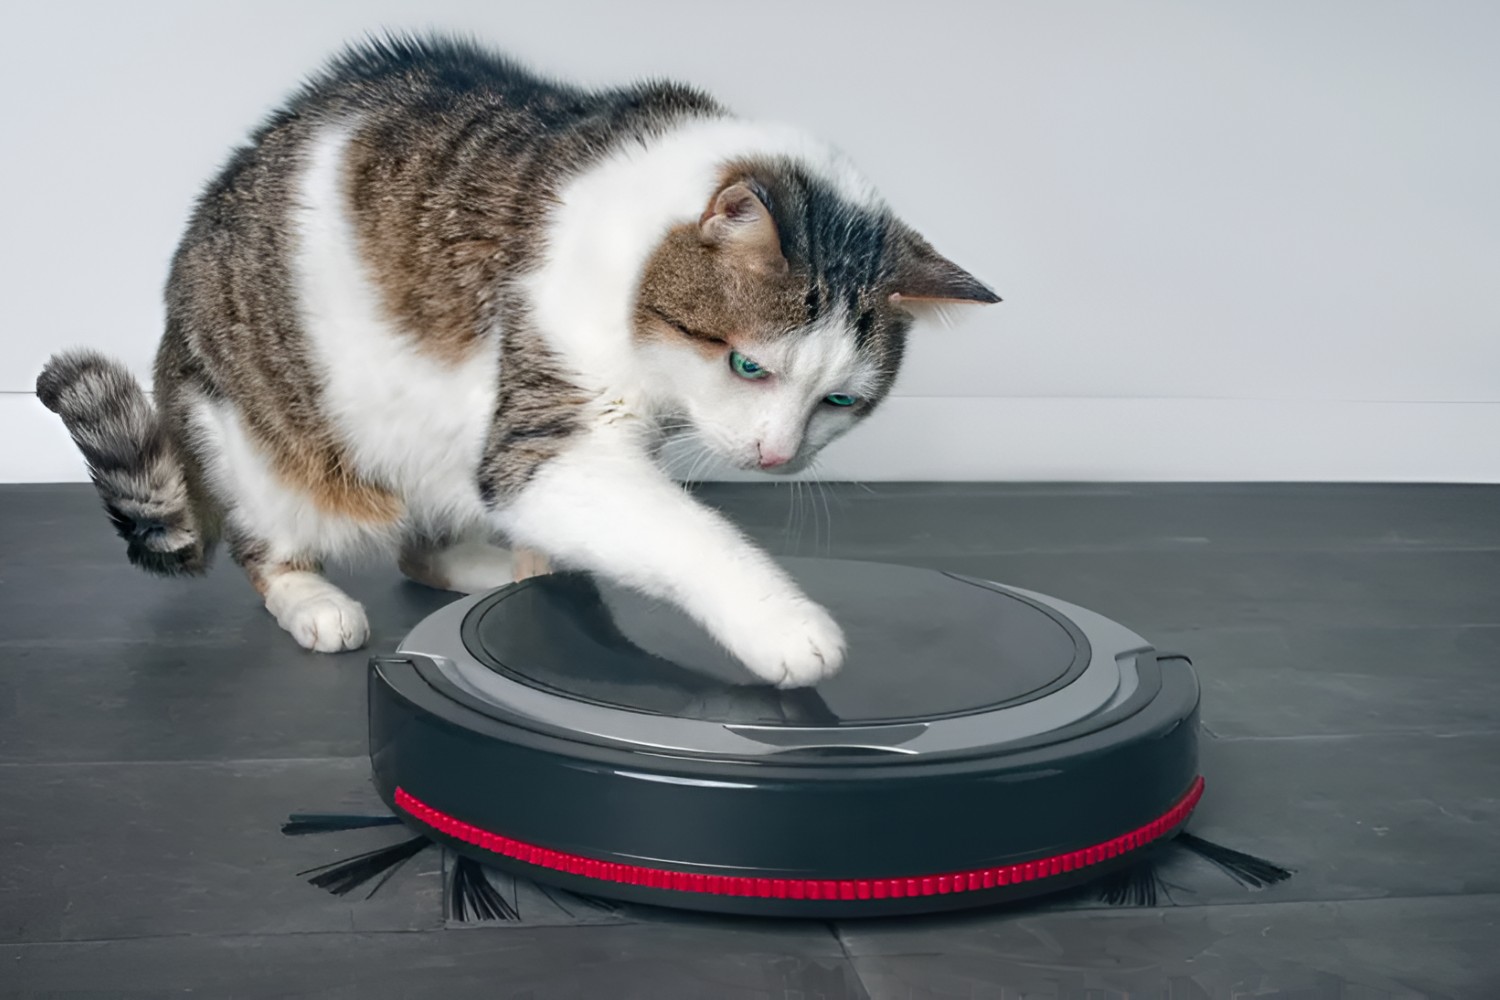 What Is The Best Robot Vacuum For Pet Hair